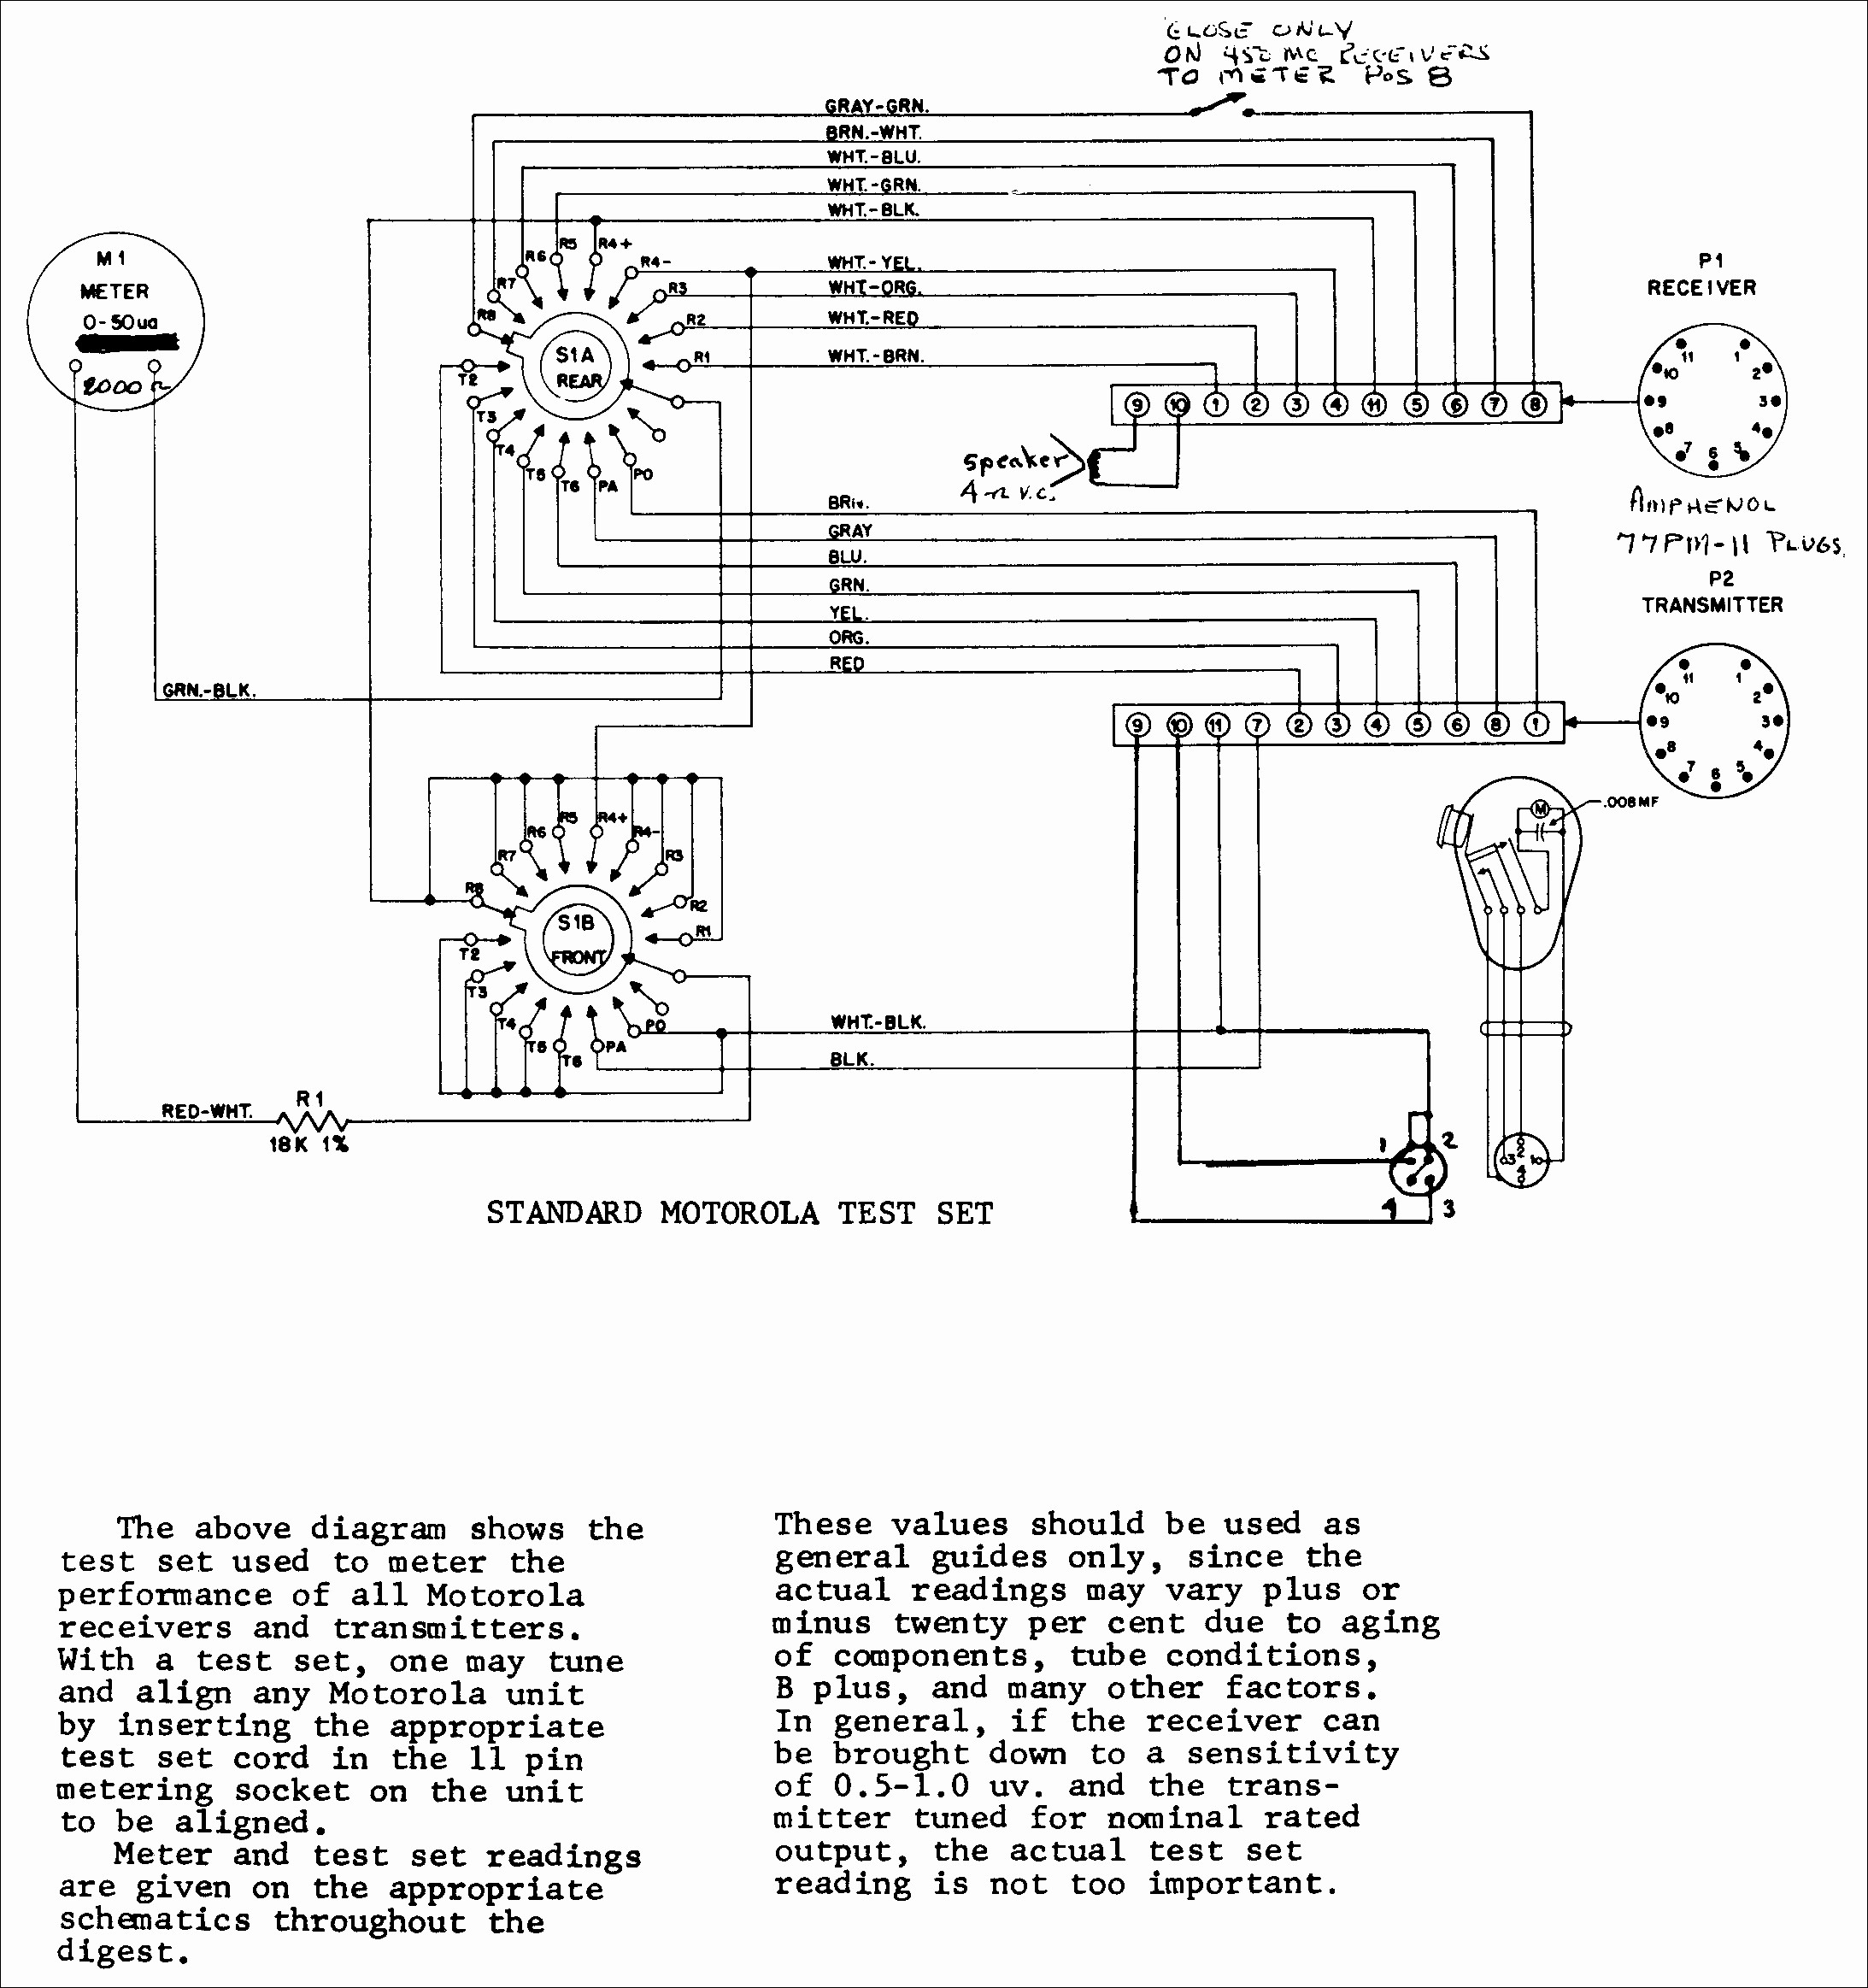 Bosch Relay Wiring Diagram Awesome Wonderful Miller 14 Pin Wiring Diagram Best Image Wire